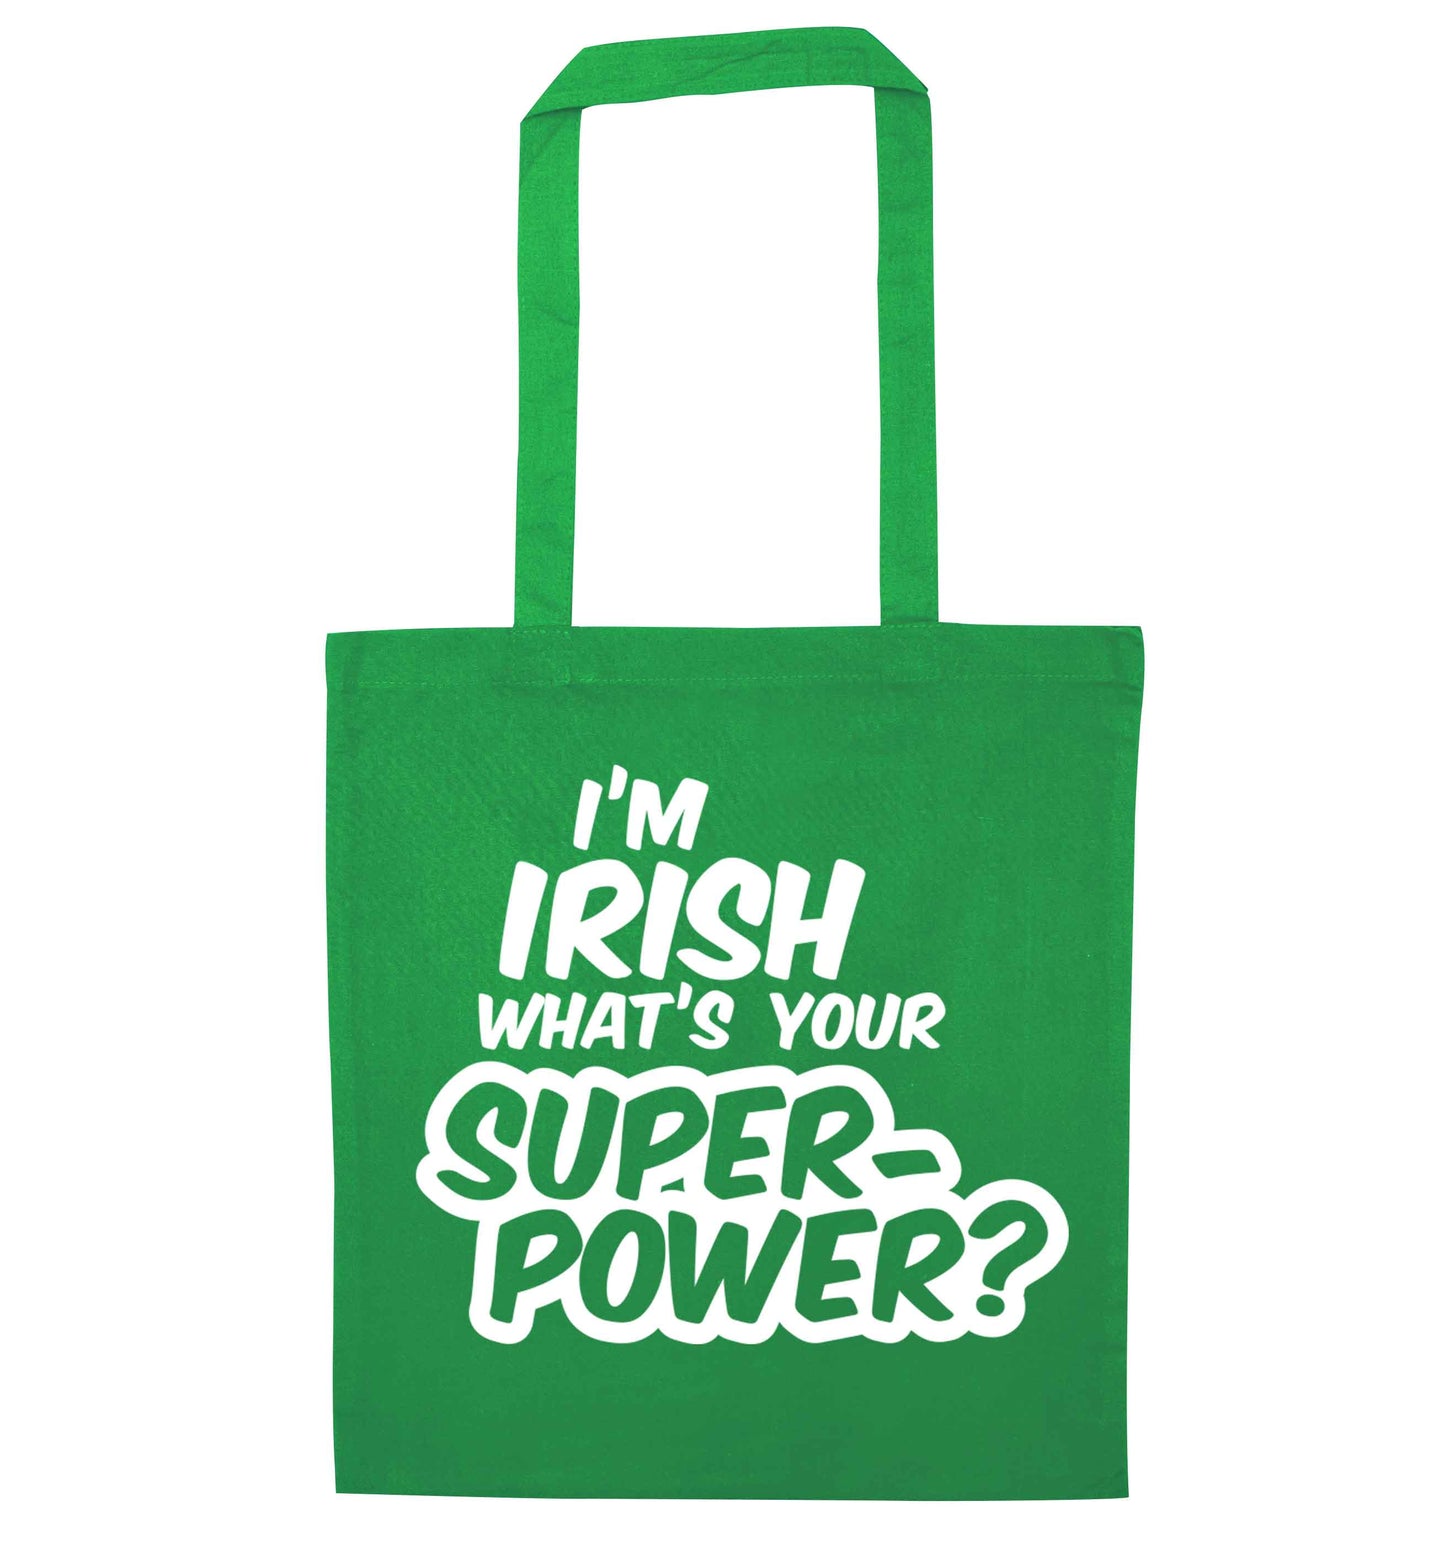 I'm Irish what's your superpower? green tote bag